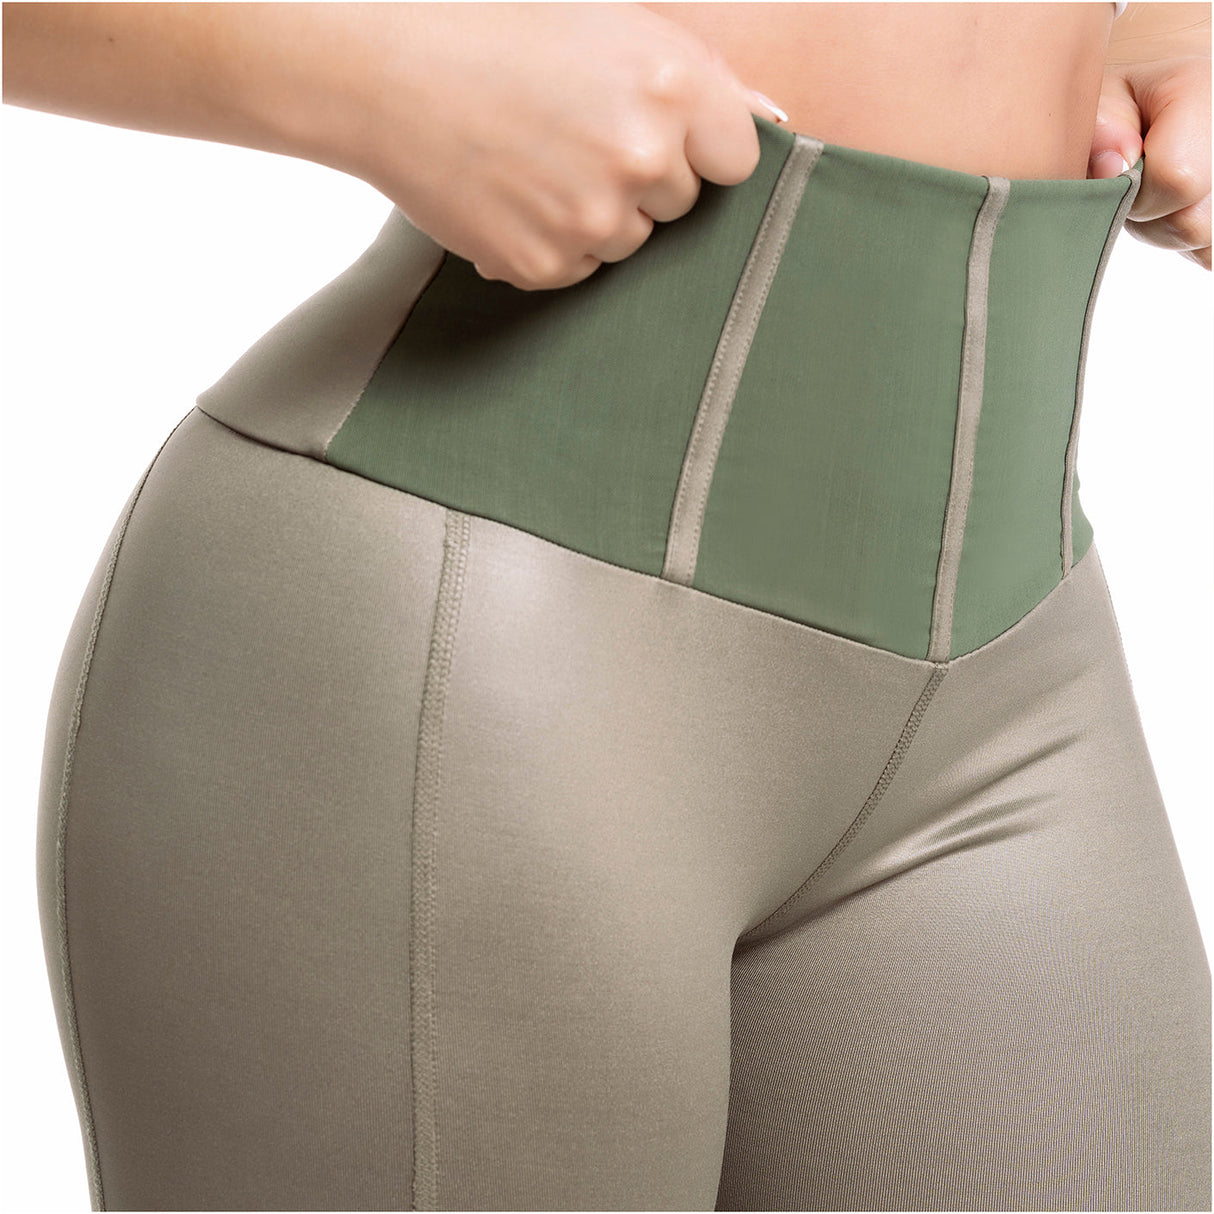 Leggings to shape your belly and buttocks.